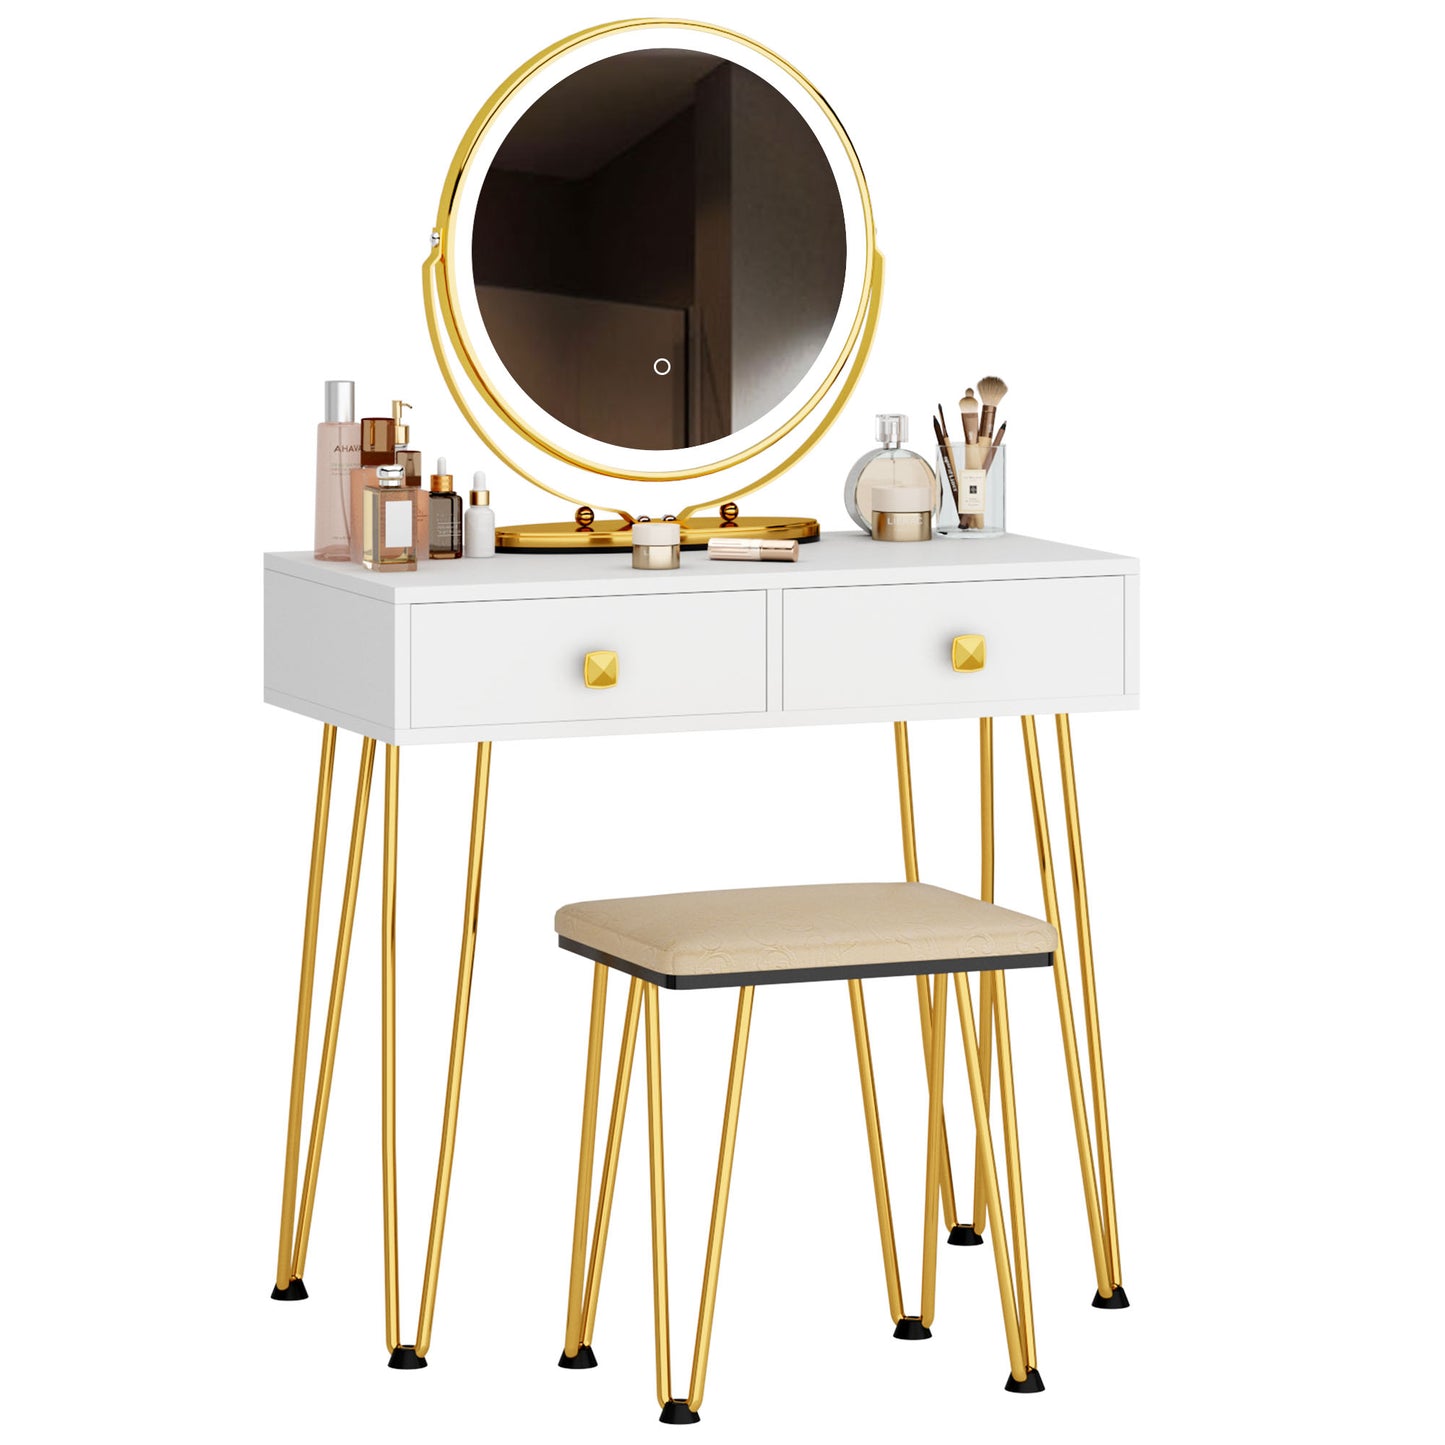 Soges Elegant White Vanity Dressing Table with Round Mirror - Perfect Holiday and Valentine's Day Gift, Fashionable Design, Solid Wood Frame - Stylish Makeup Vanity